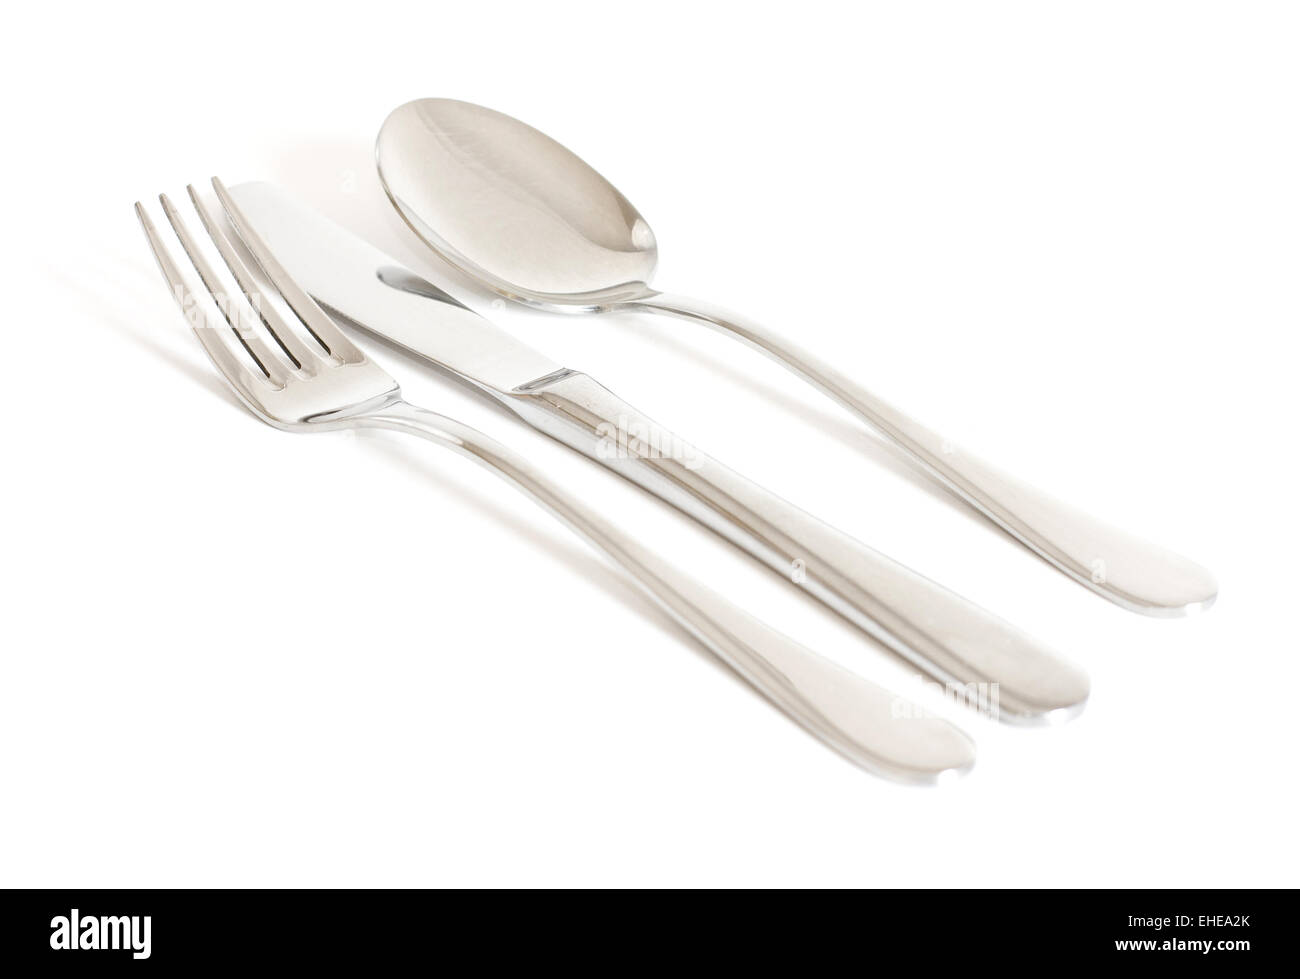 Fork, knife and spoon Stock Photo